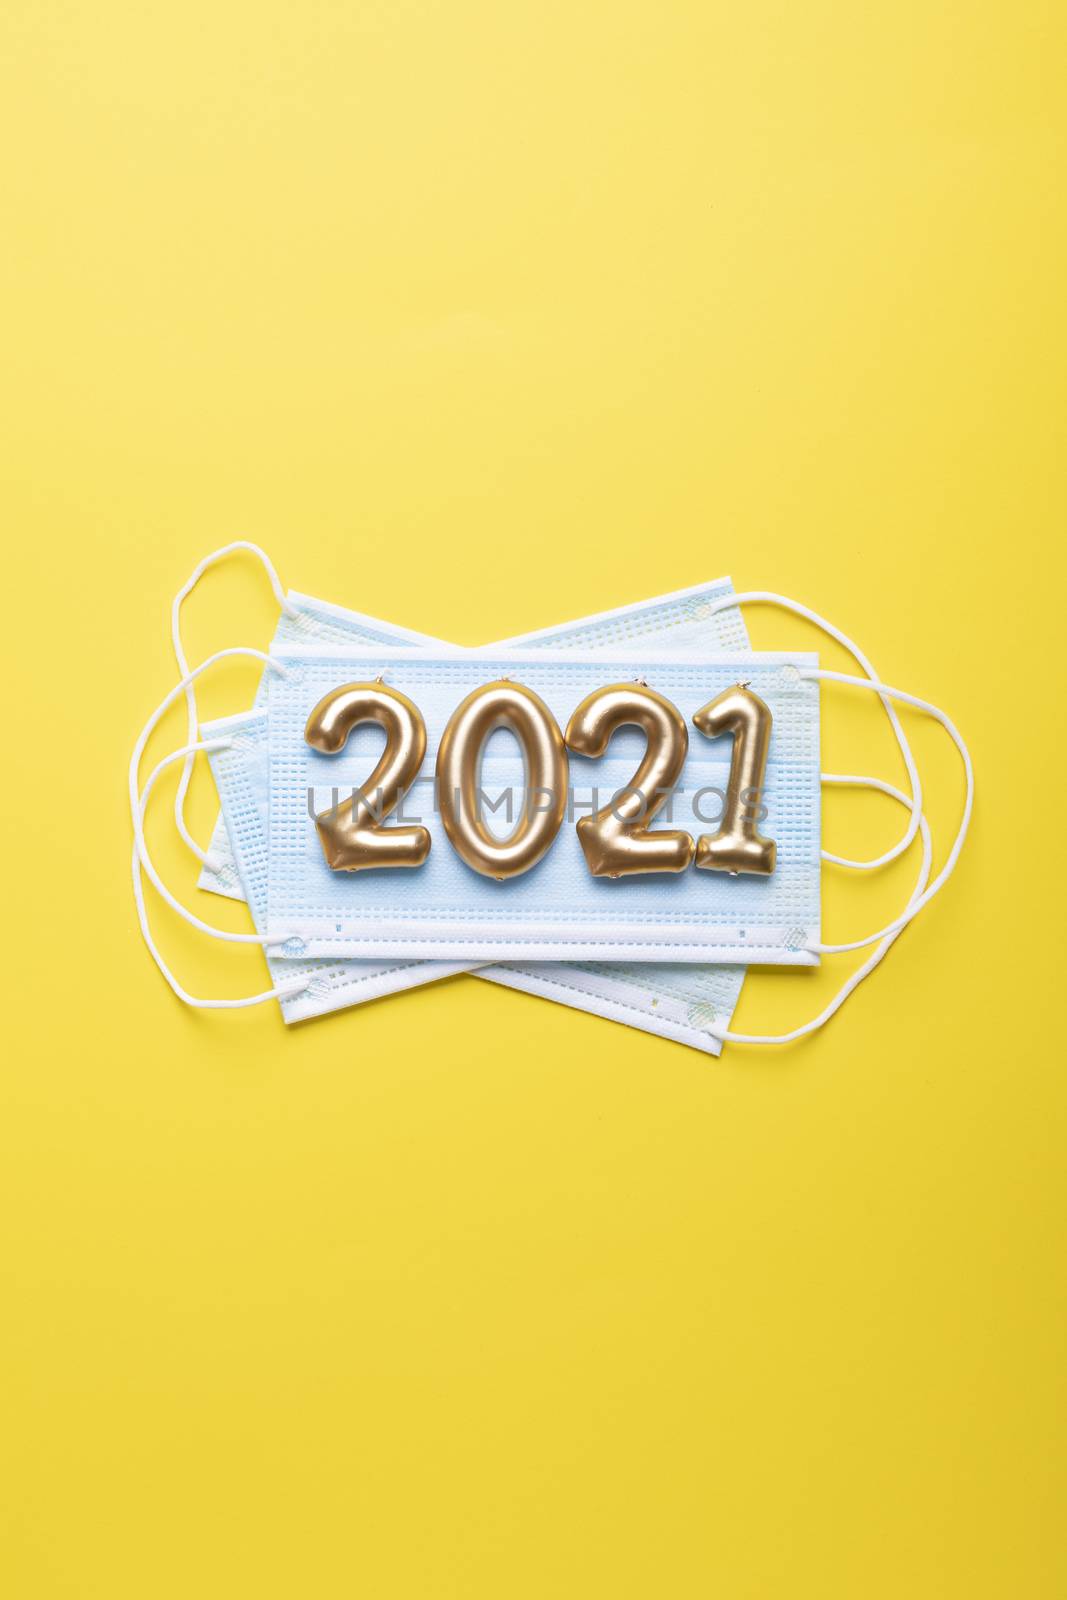 Gold numbers 2021 with face mask on bright yellow background. Happy new pandemic year